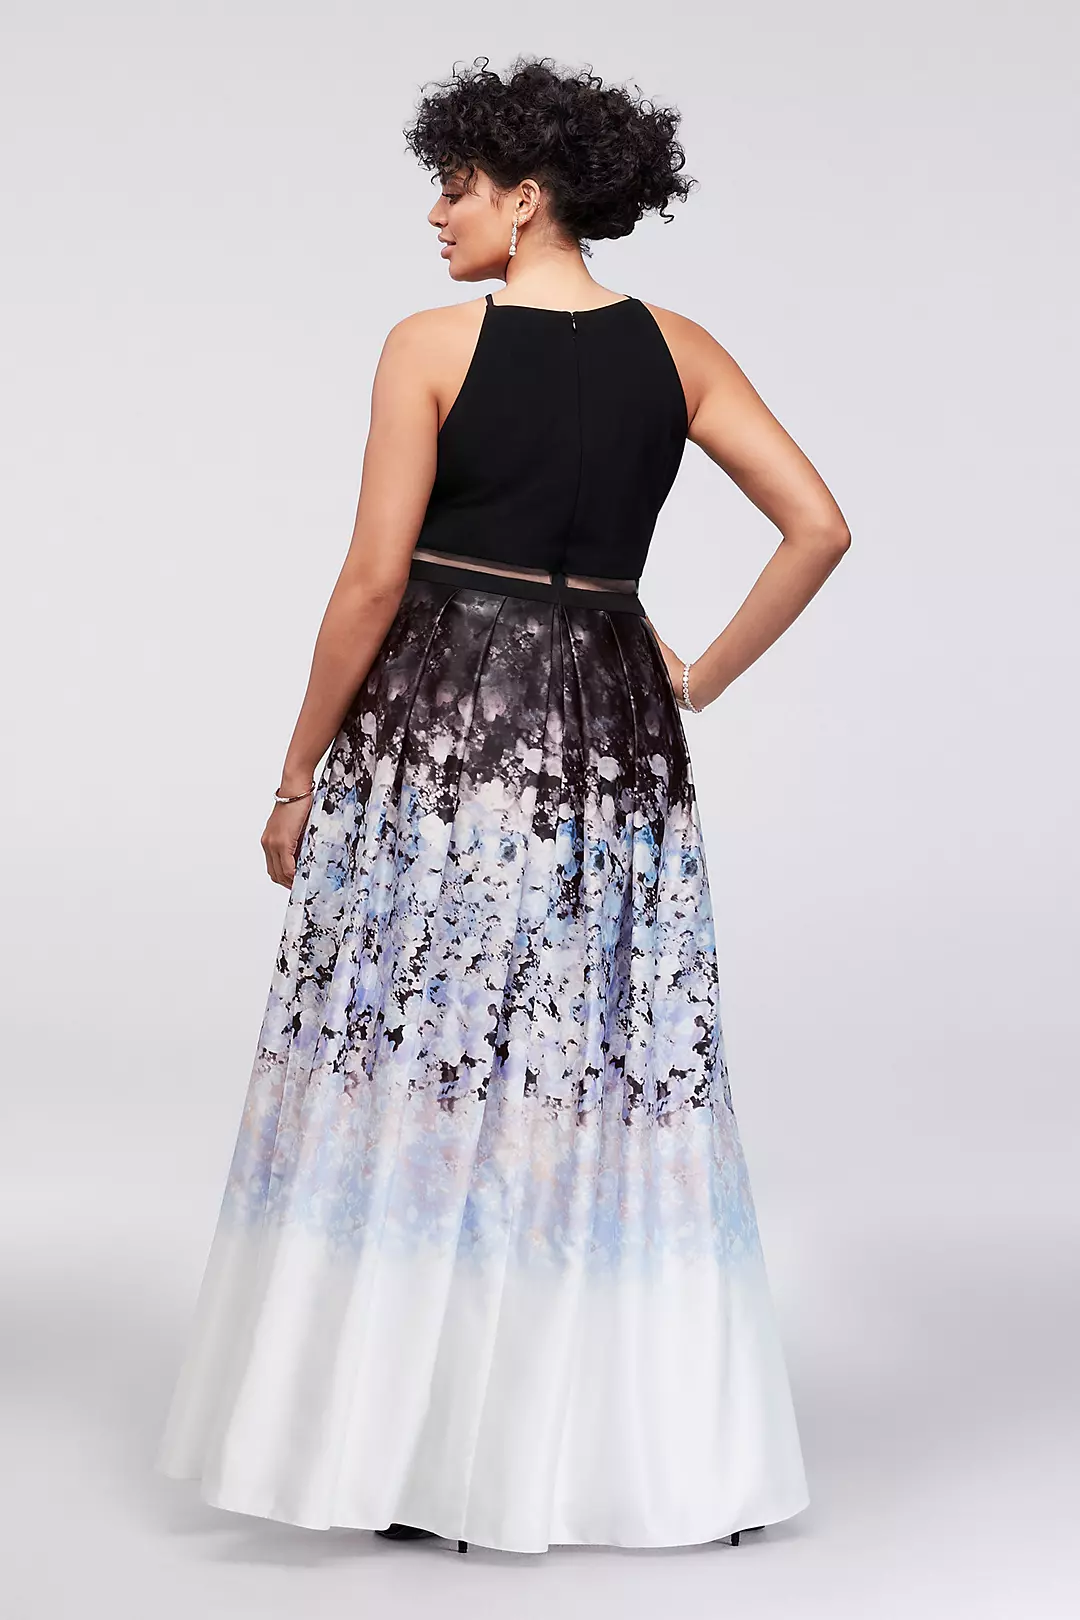 Jersey and Ombre Floral Charmeuse Ball Gown Image 2